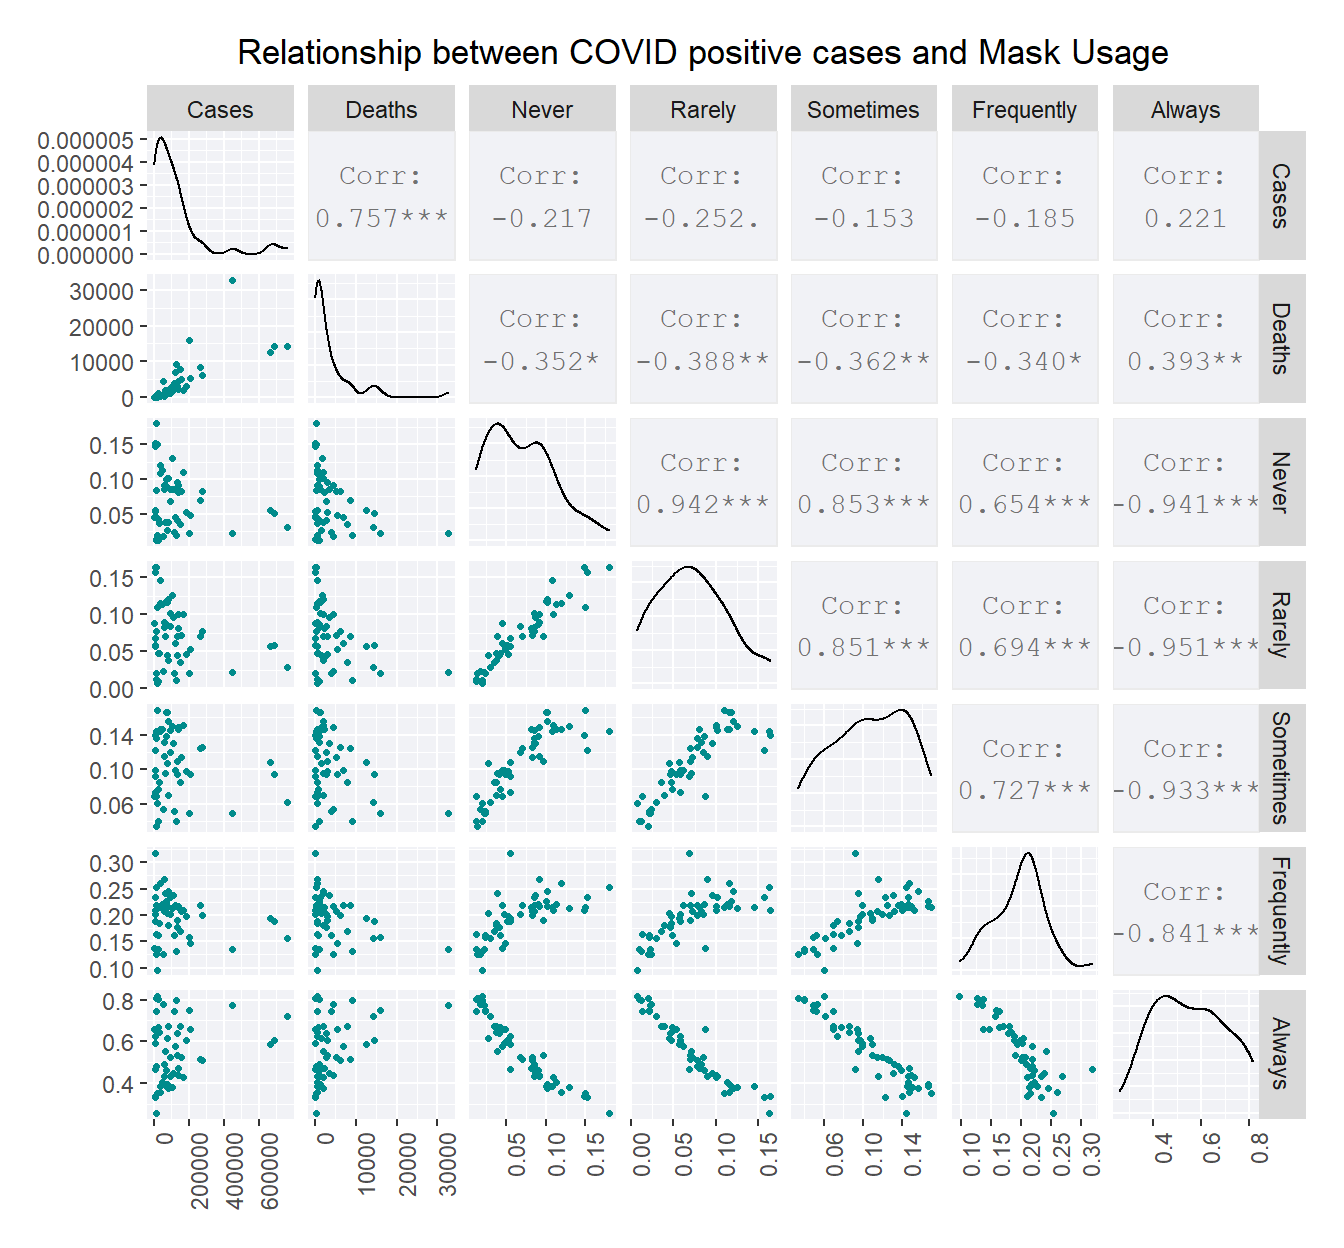 The scatter plot matrix depicts the correlation between the frequency of mask usage and cases as well as deaths.The number of deaths appear to have more influence of the behaviour of mask usage.